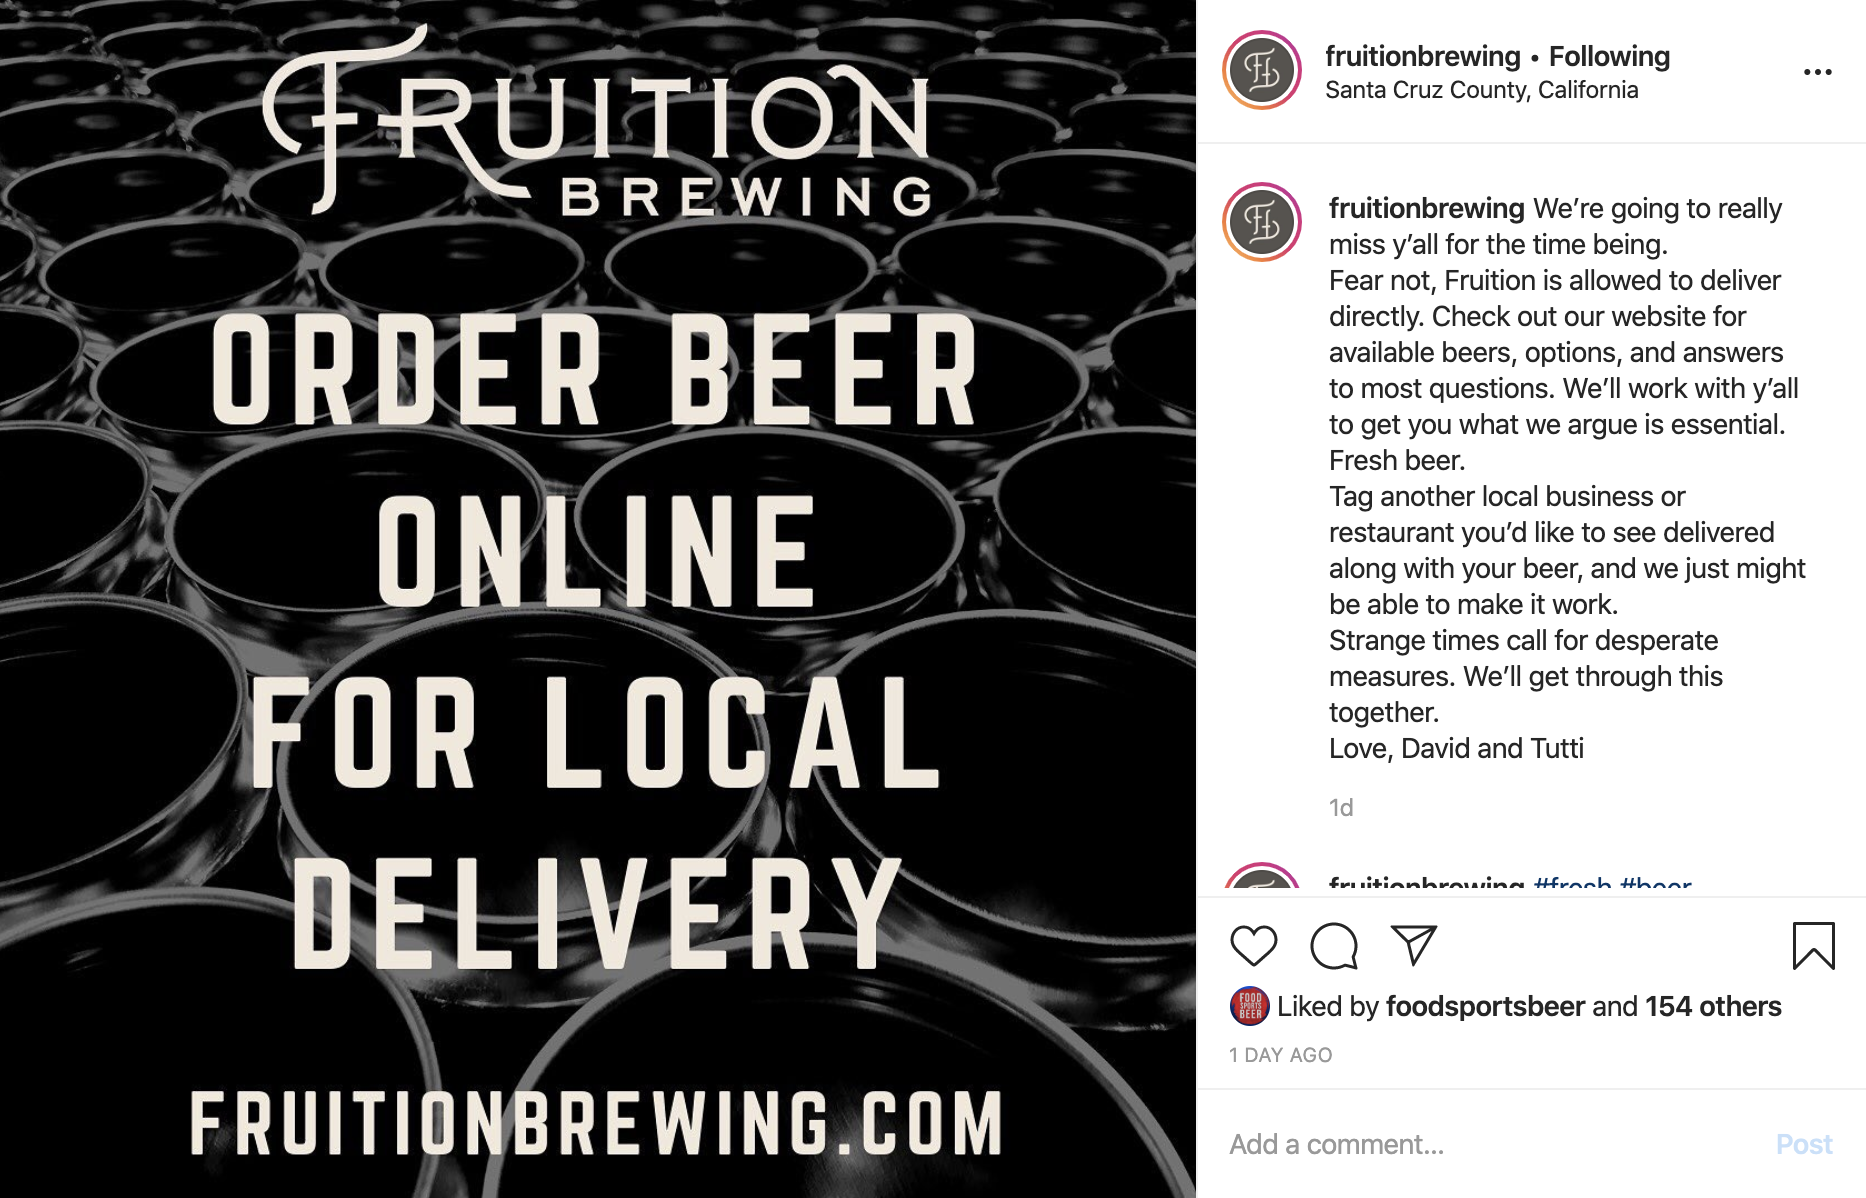 How To Be Resilient: Fruition Brewing Instagram